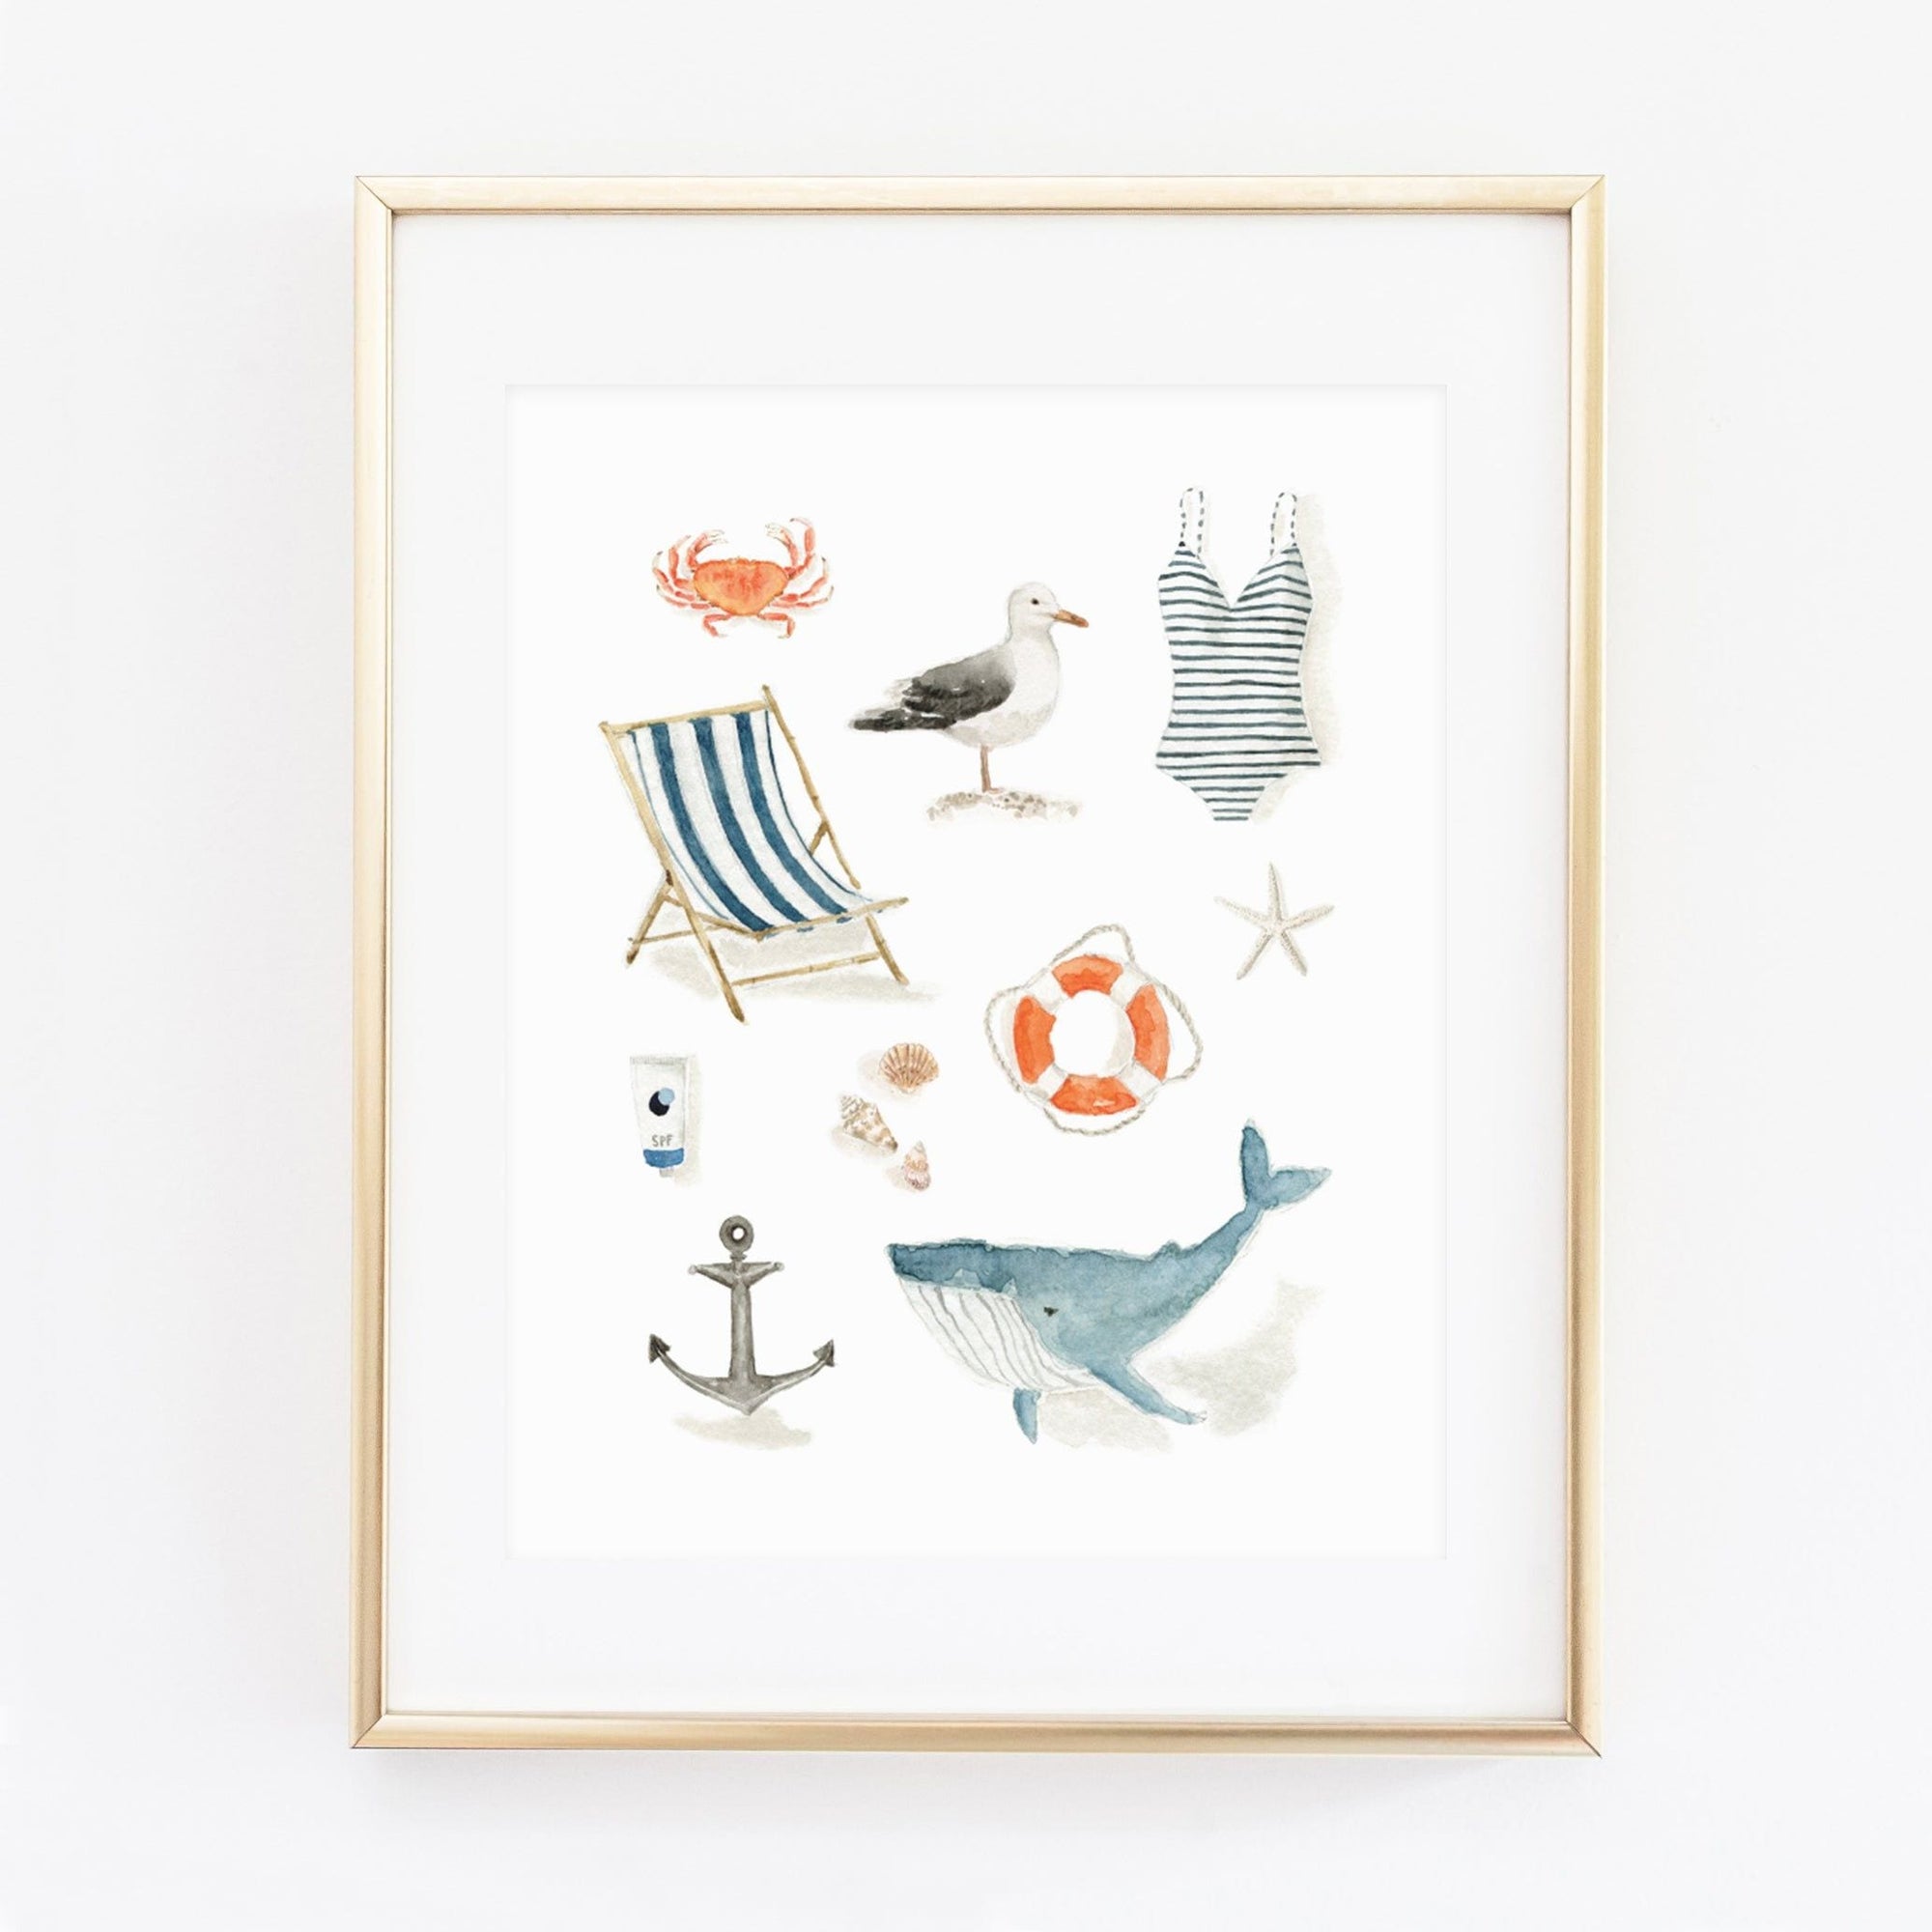 Emily Lex Studio - Gathering inspiration for a seaside watercolor workbook  coming this summer! 🐳🌊🛟⚓️ What seaside sketches do you want to paint?  Please tell me!